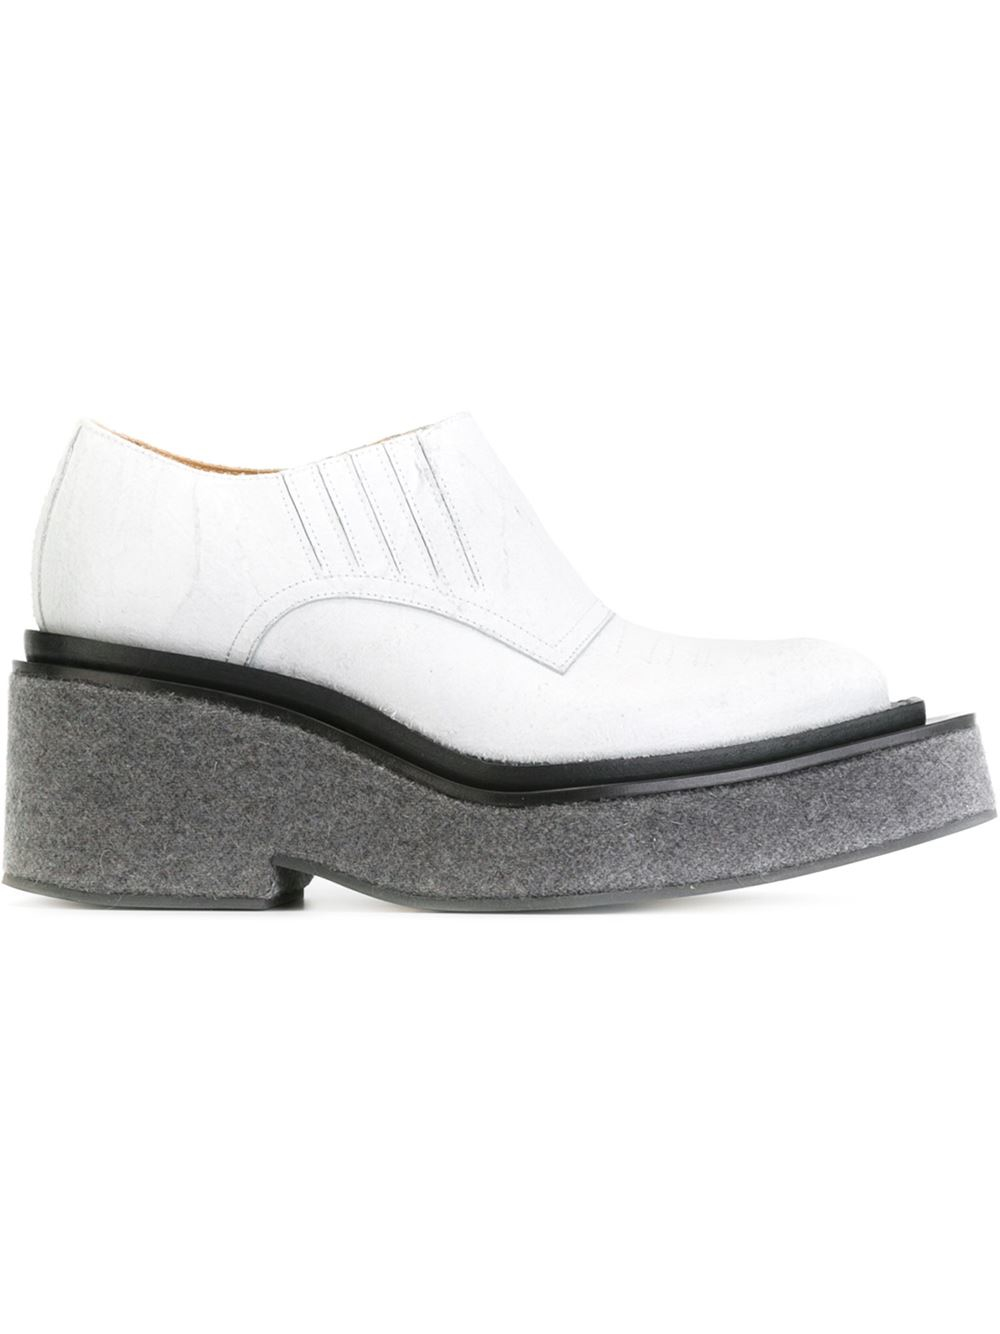 MM6 by Maison Martin Margiela Pointed Toe Platform Shoes in White 